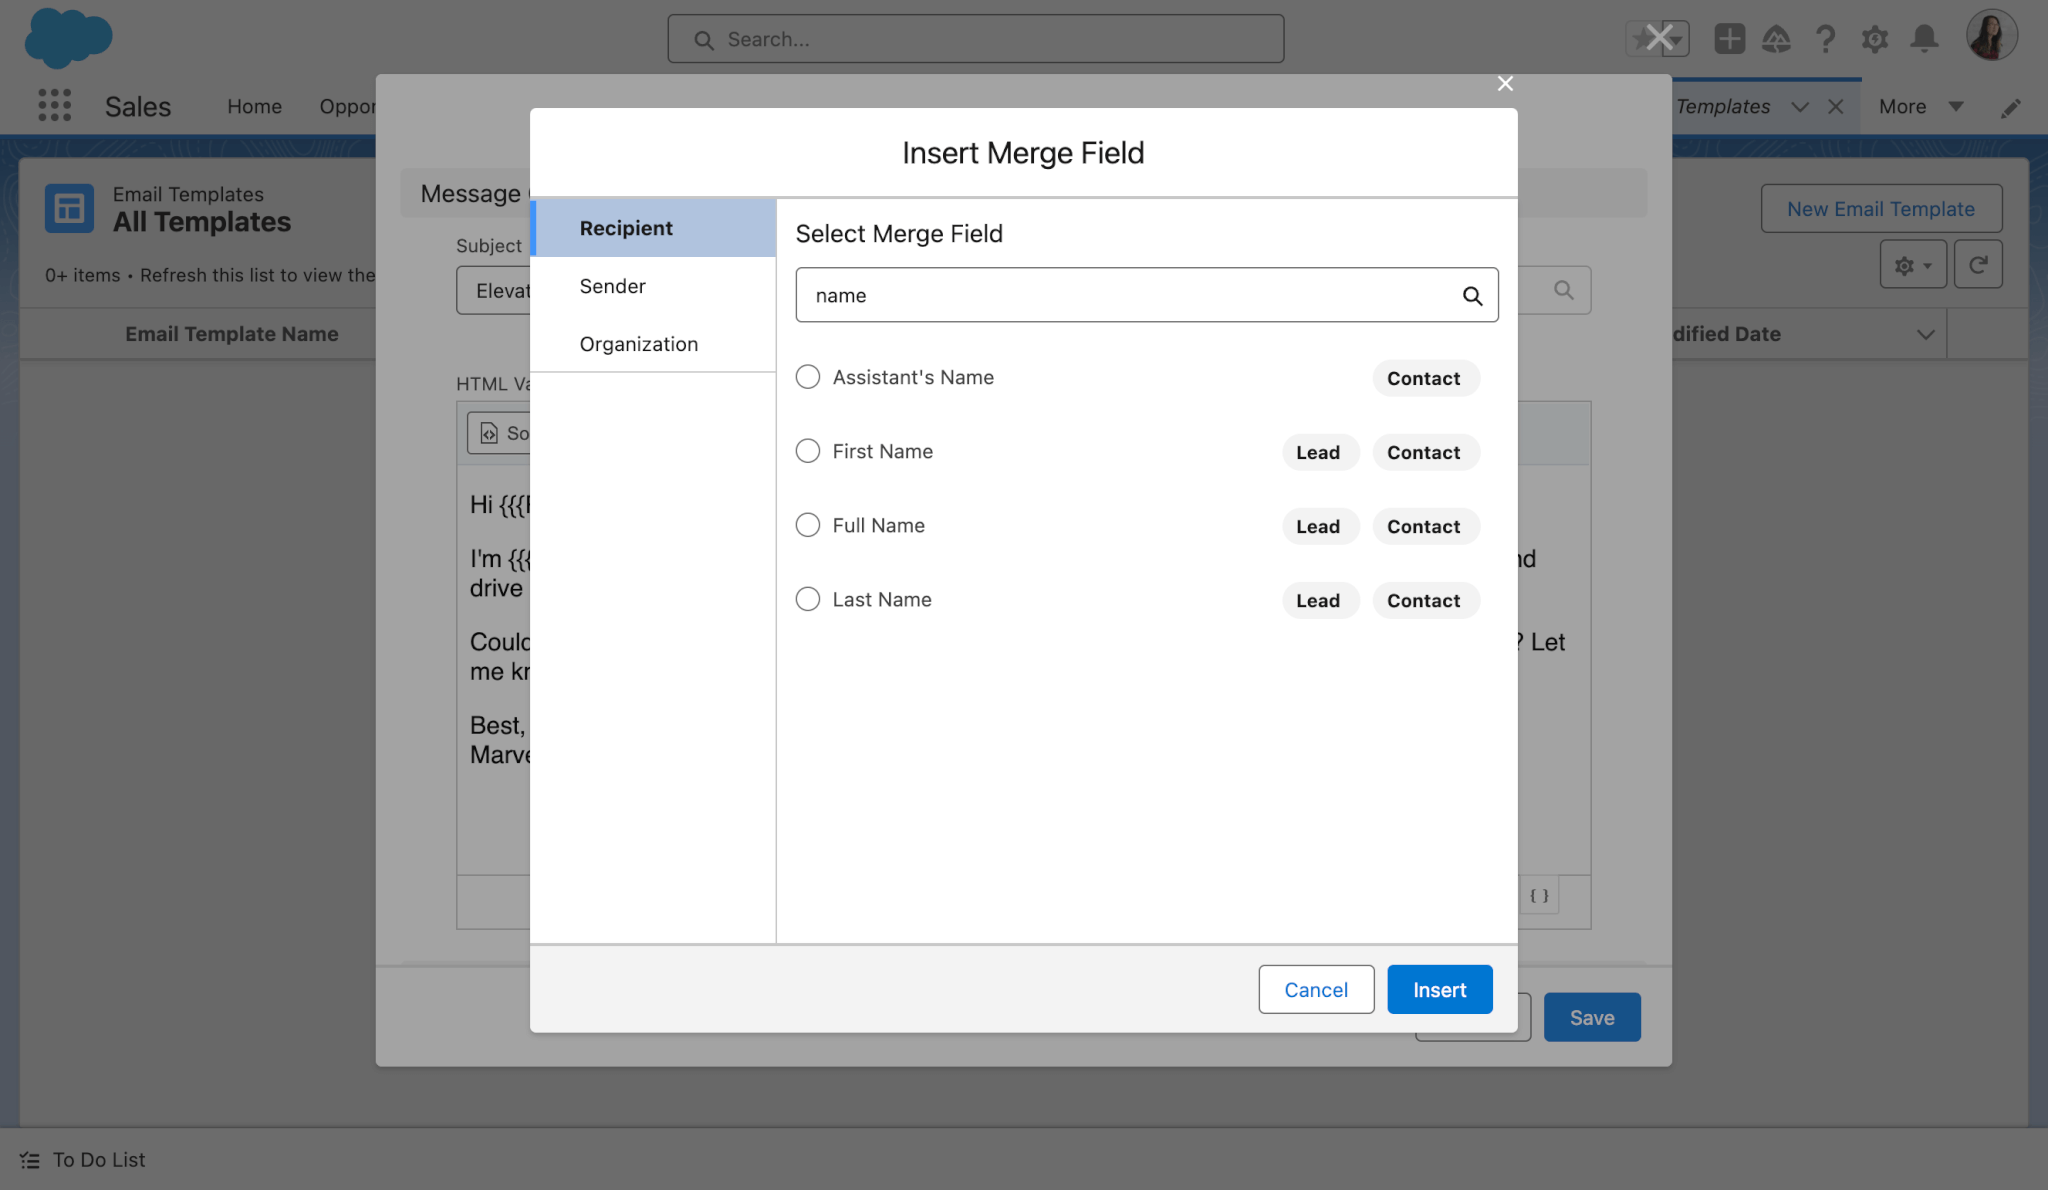 Insert Merge Field modal with available merge fields displayed